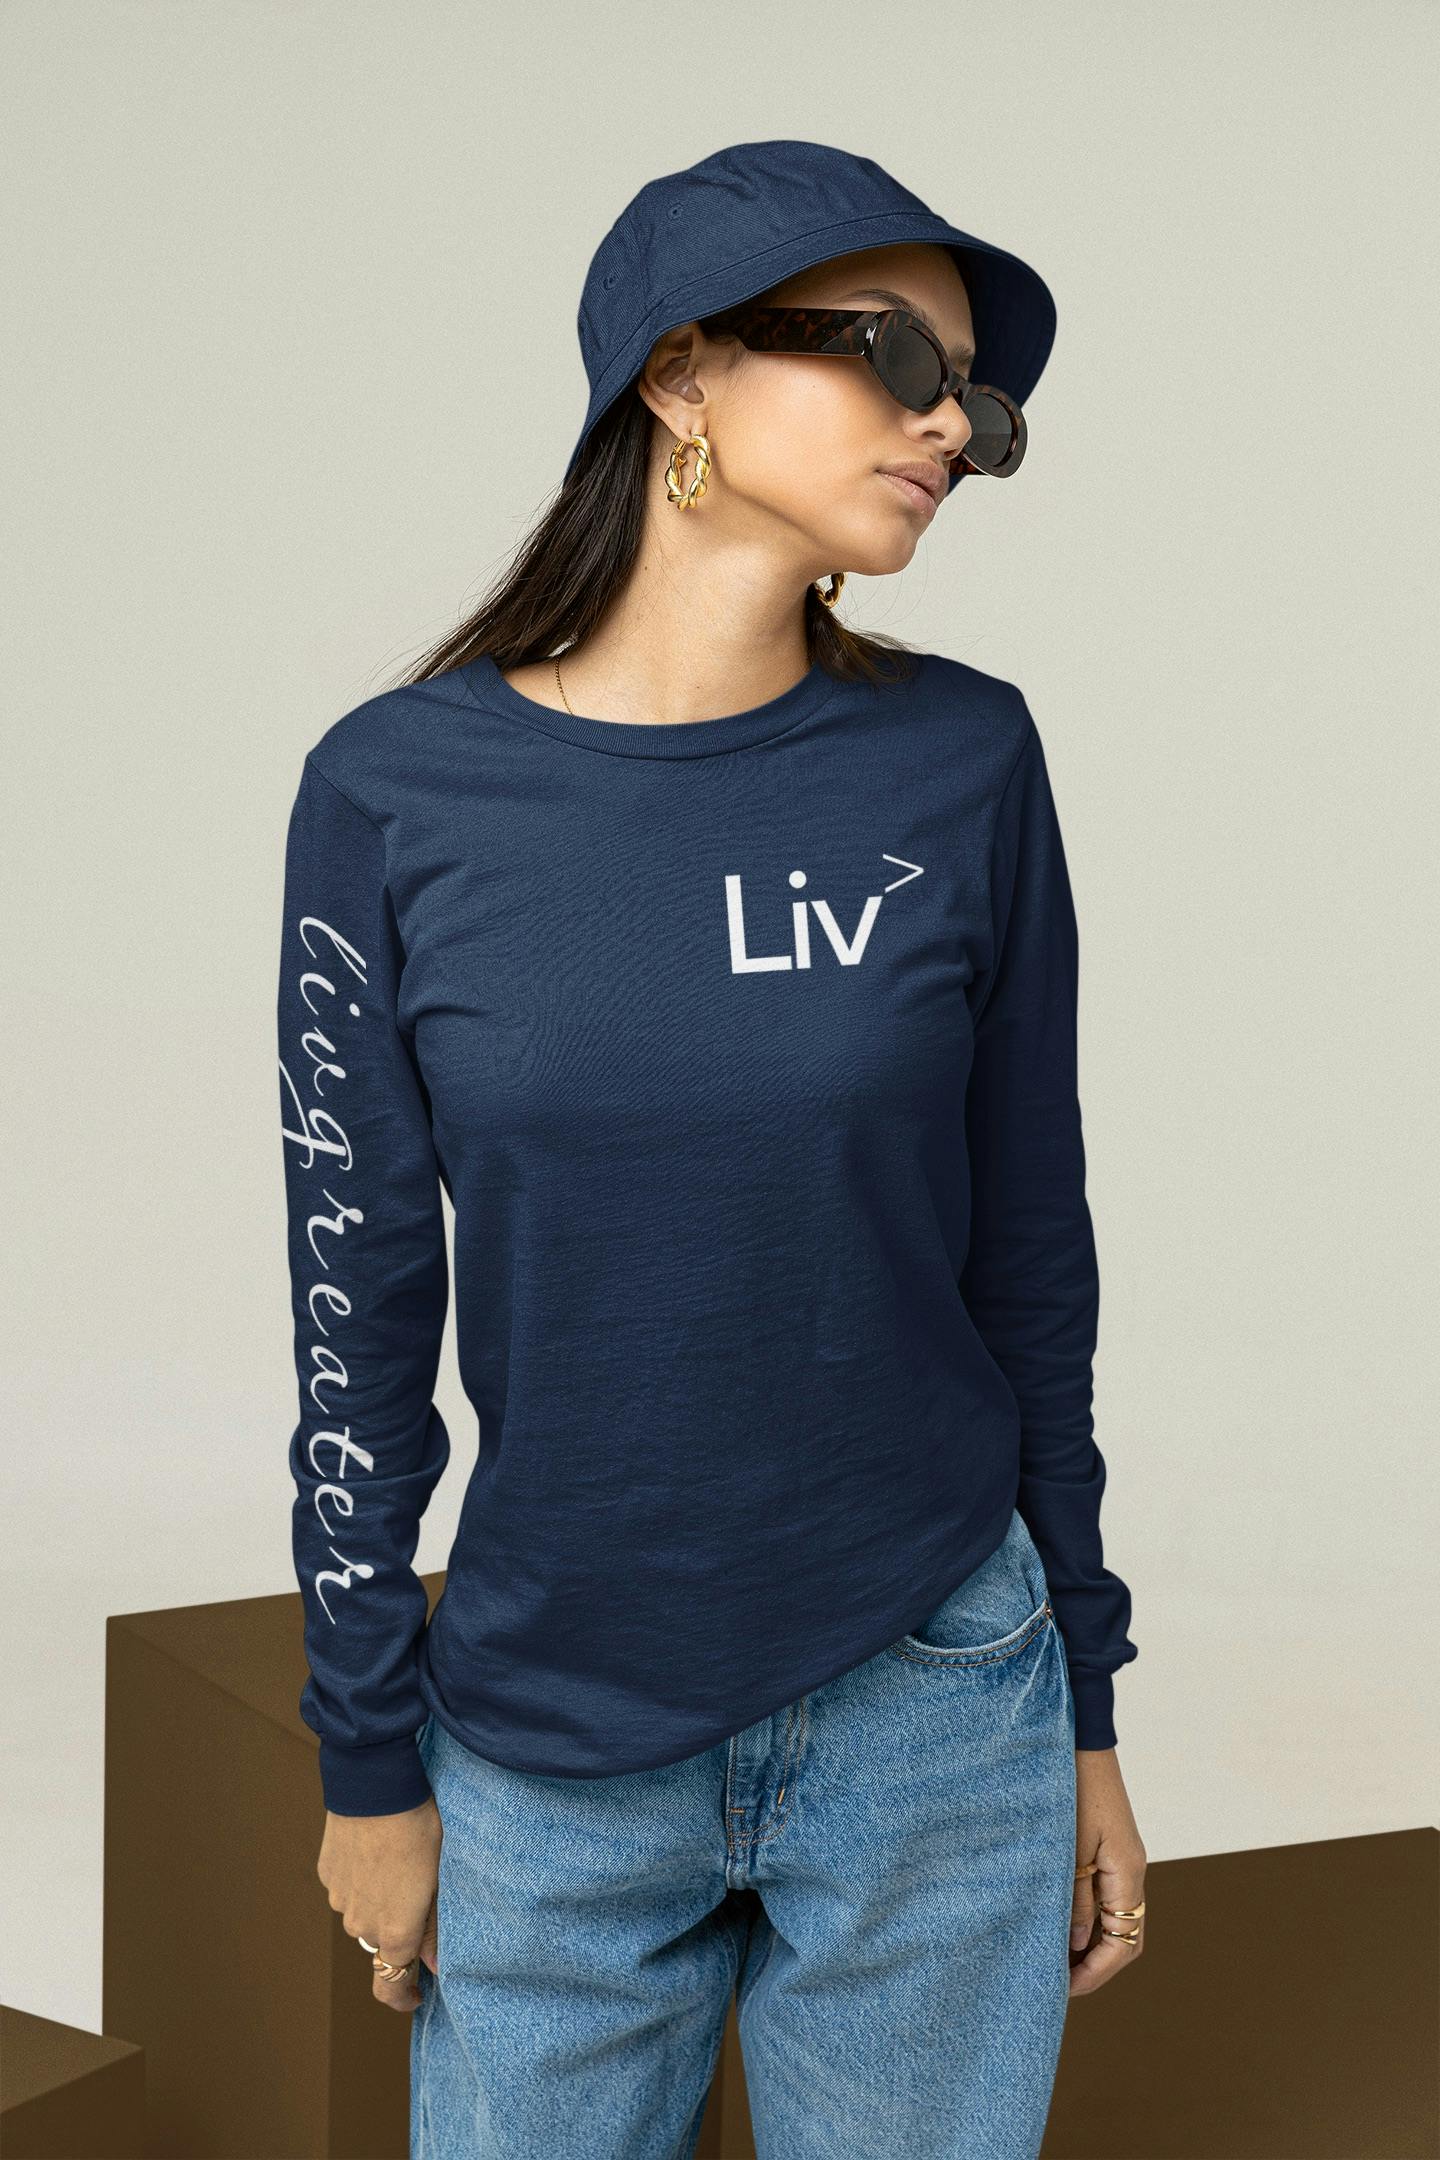 LivGreater Long Sleeve Tee Navy Large